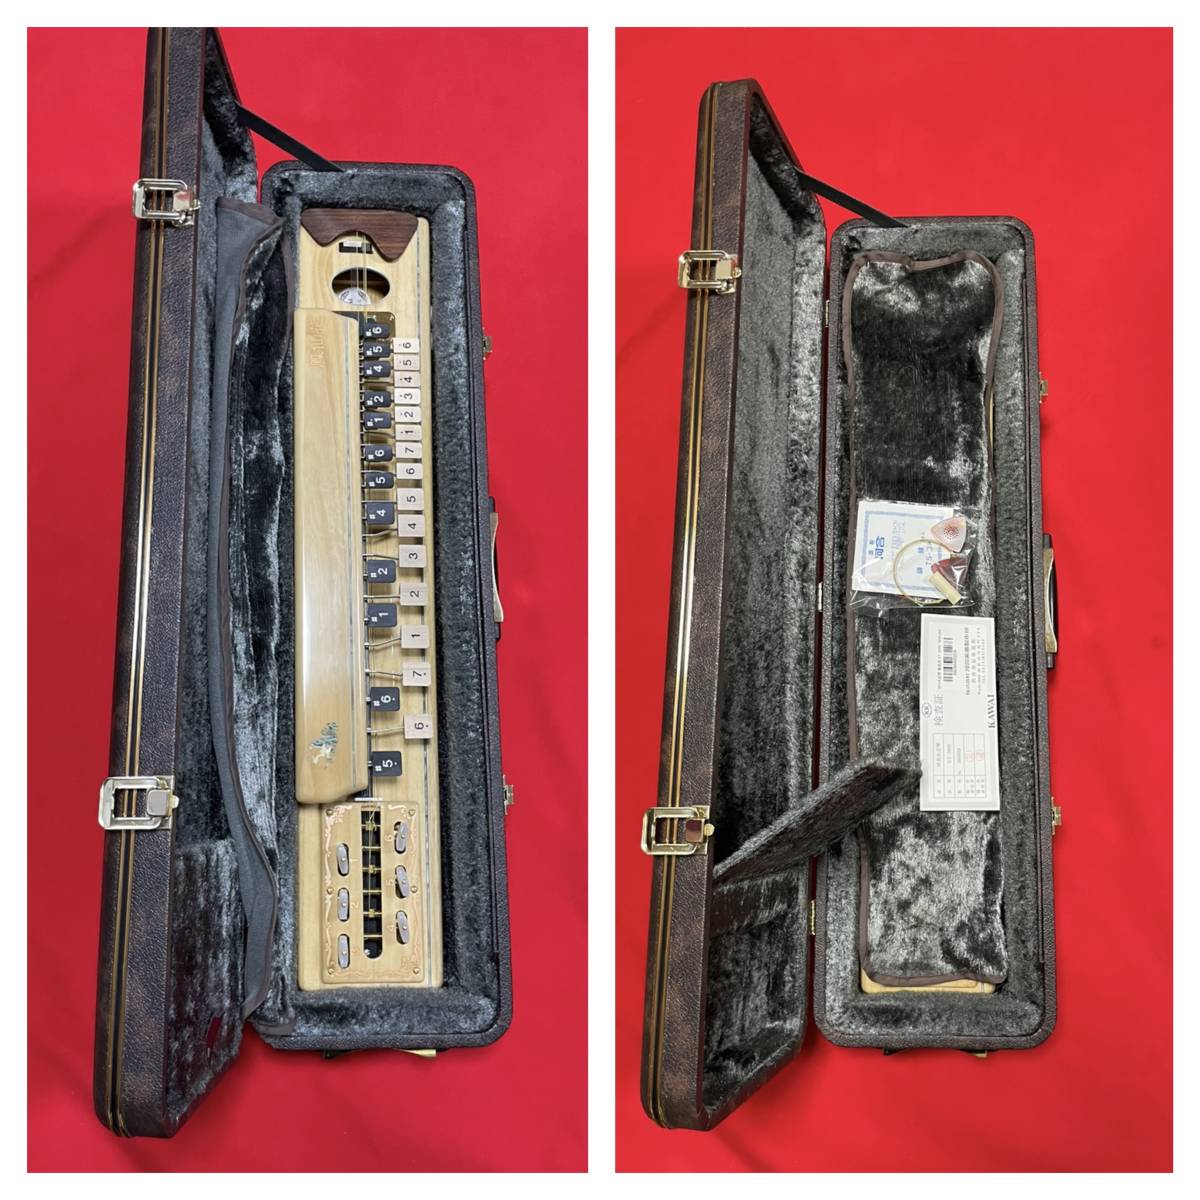  super rare top class special selection goods electric type Taisho koto .. flower (.....) KT-200E Taisho koto regular price 20 ten thousand Taisho koto traditional Japanese musical instrument band traditional Japanese musical instrument KAWAI Kawai river . musical instruments 